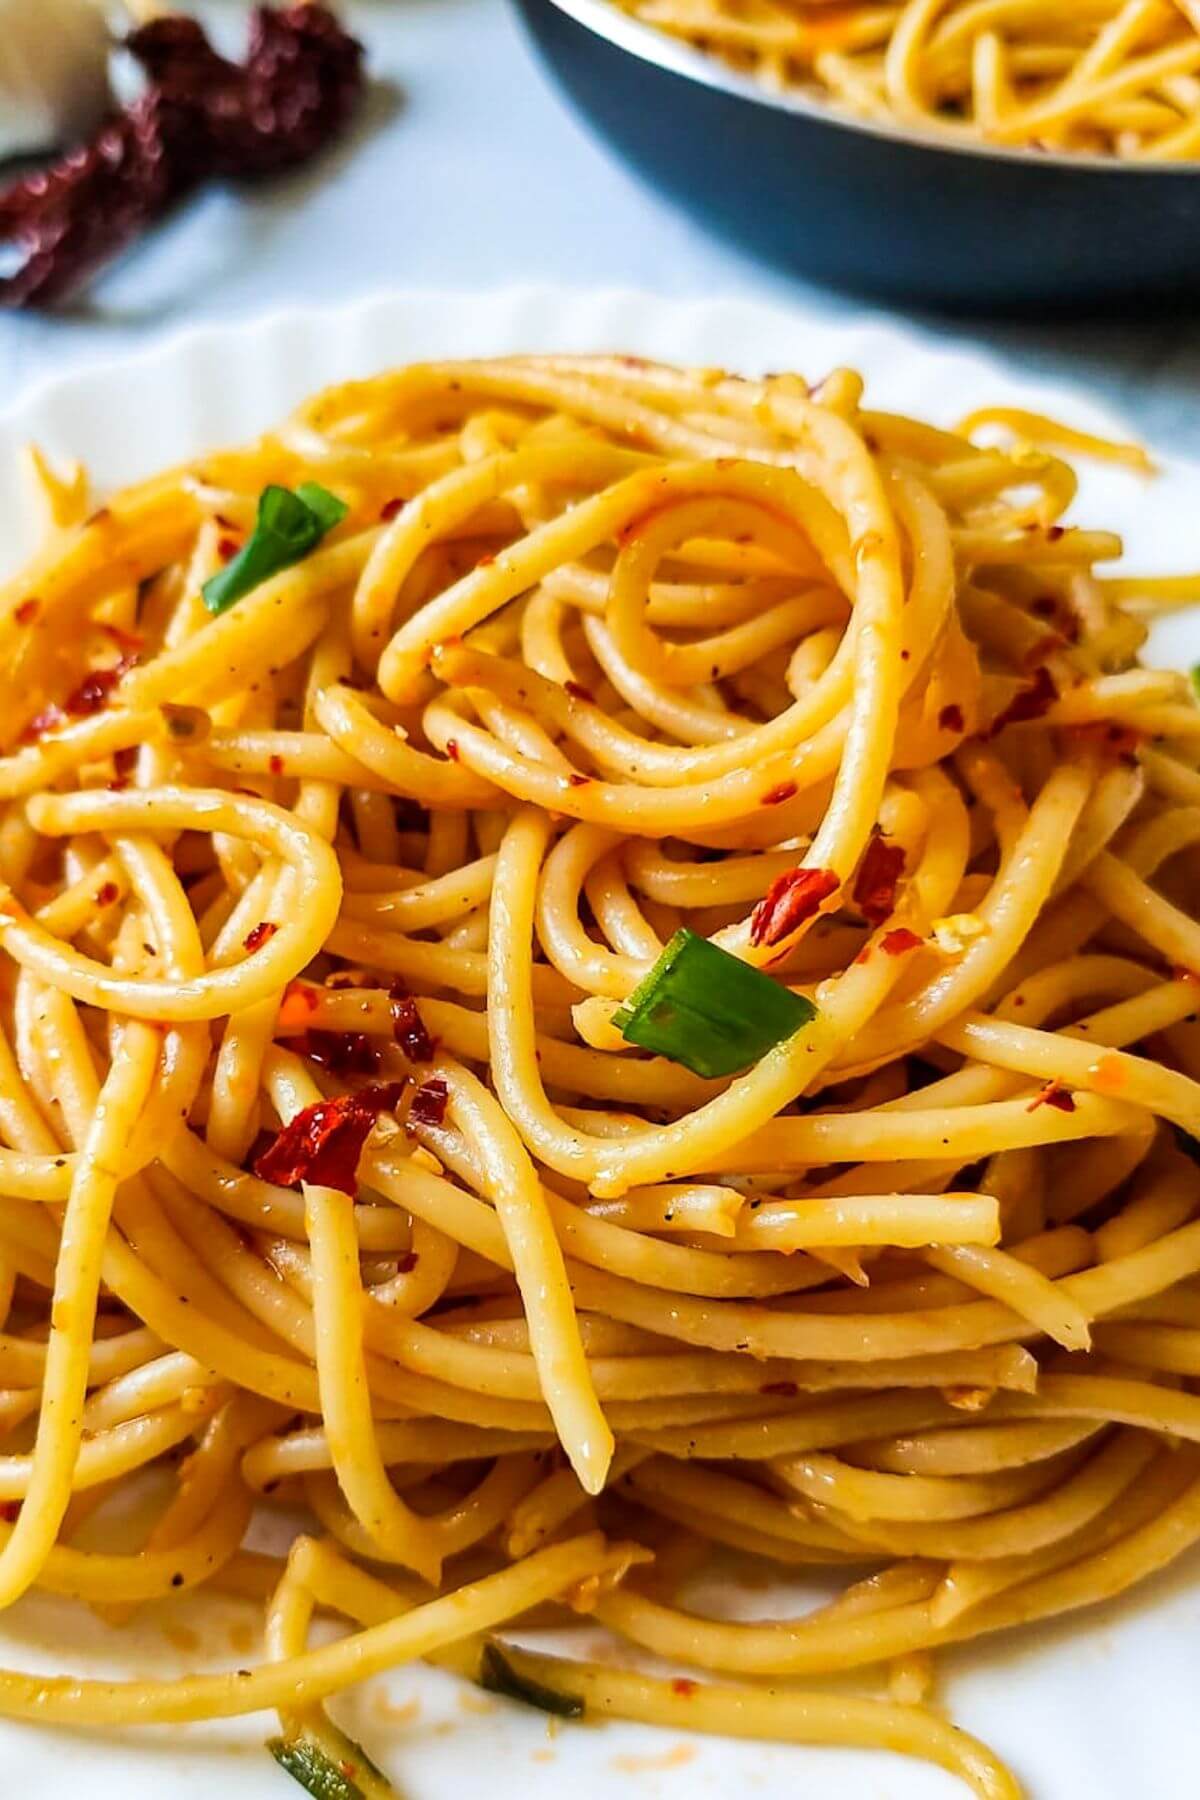 Spicy garlic noodles on a plate.